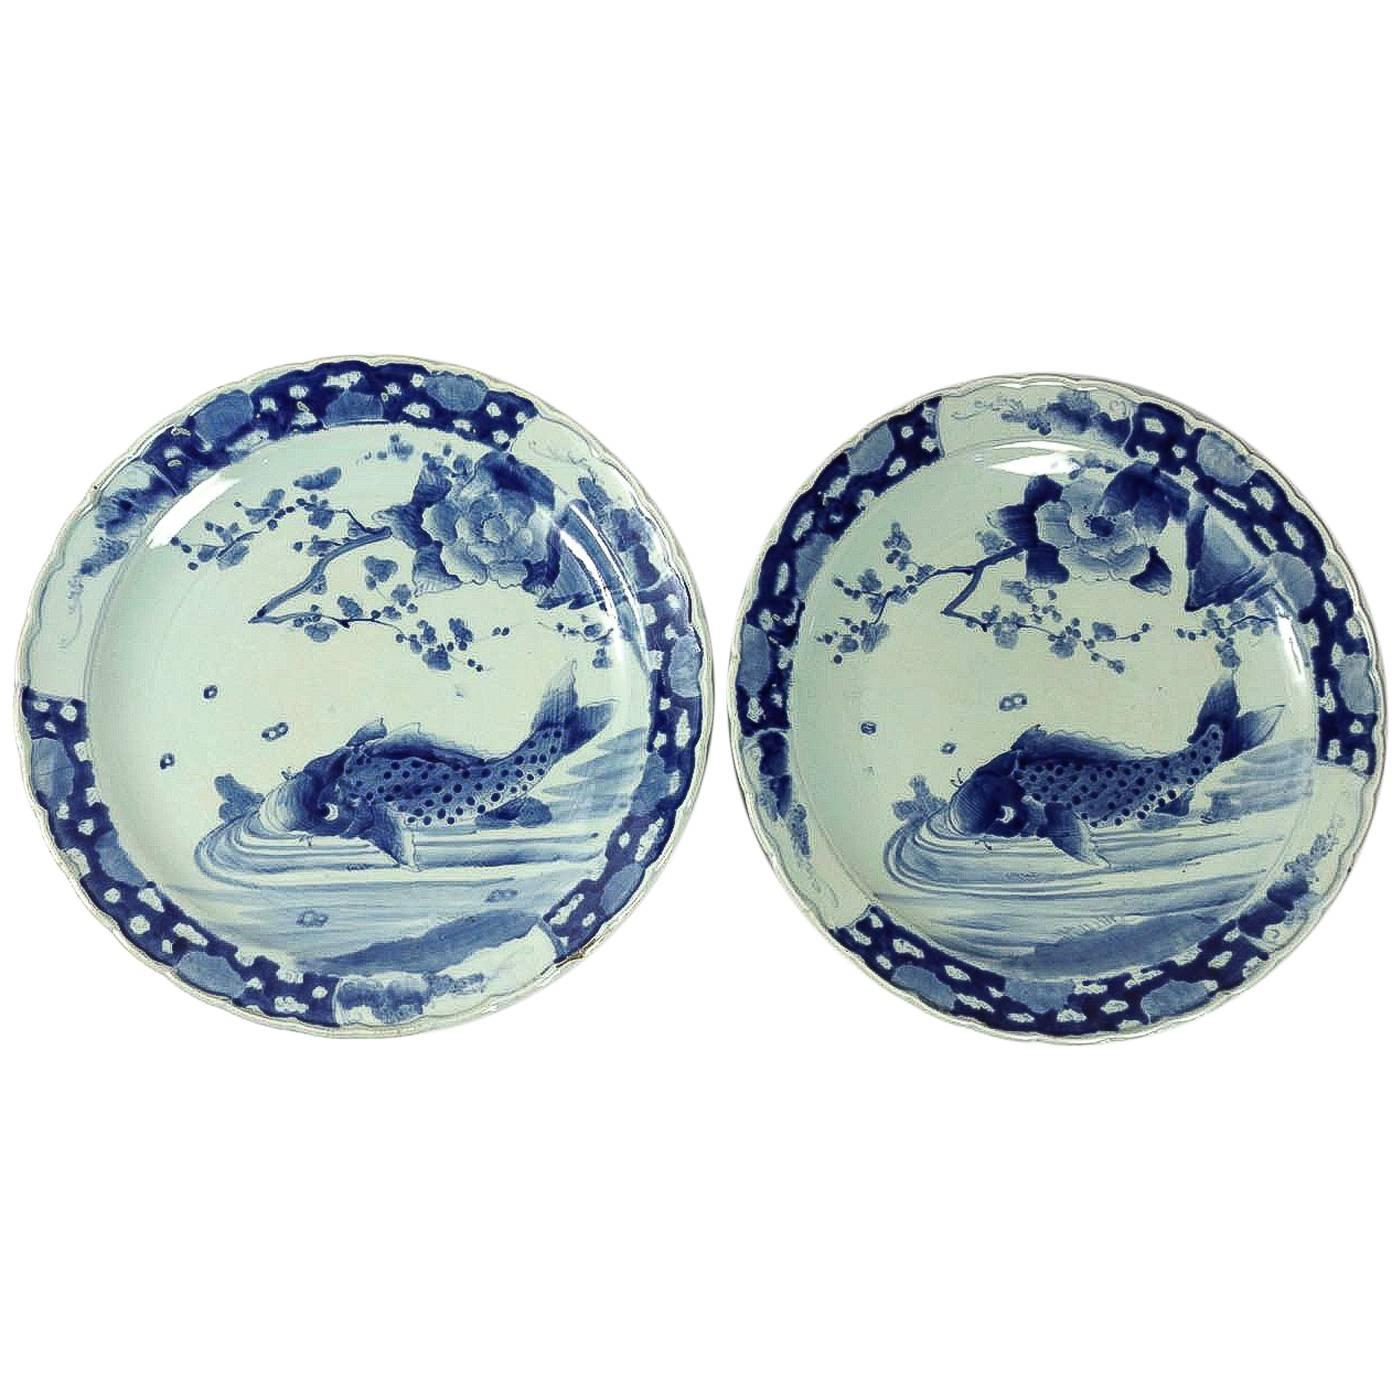 19th Century Japan, a Large Pair of Porcelain Dishes with Blue Koï Carps For Sale